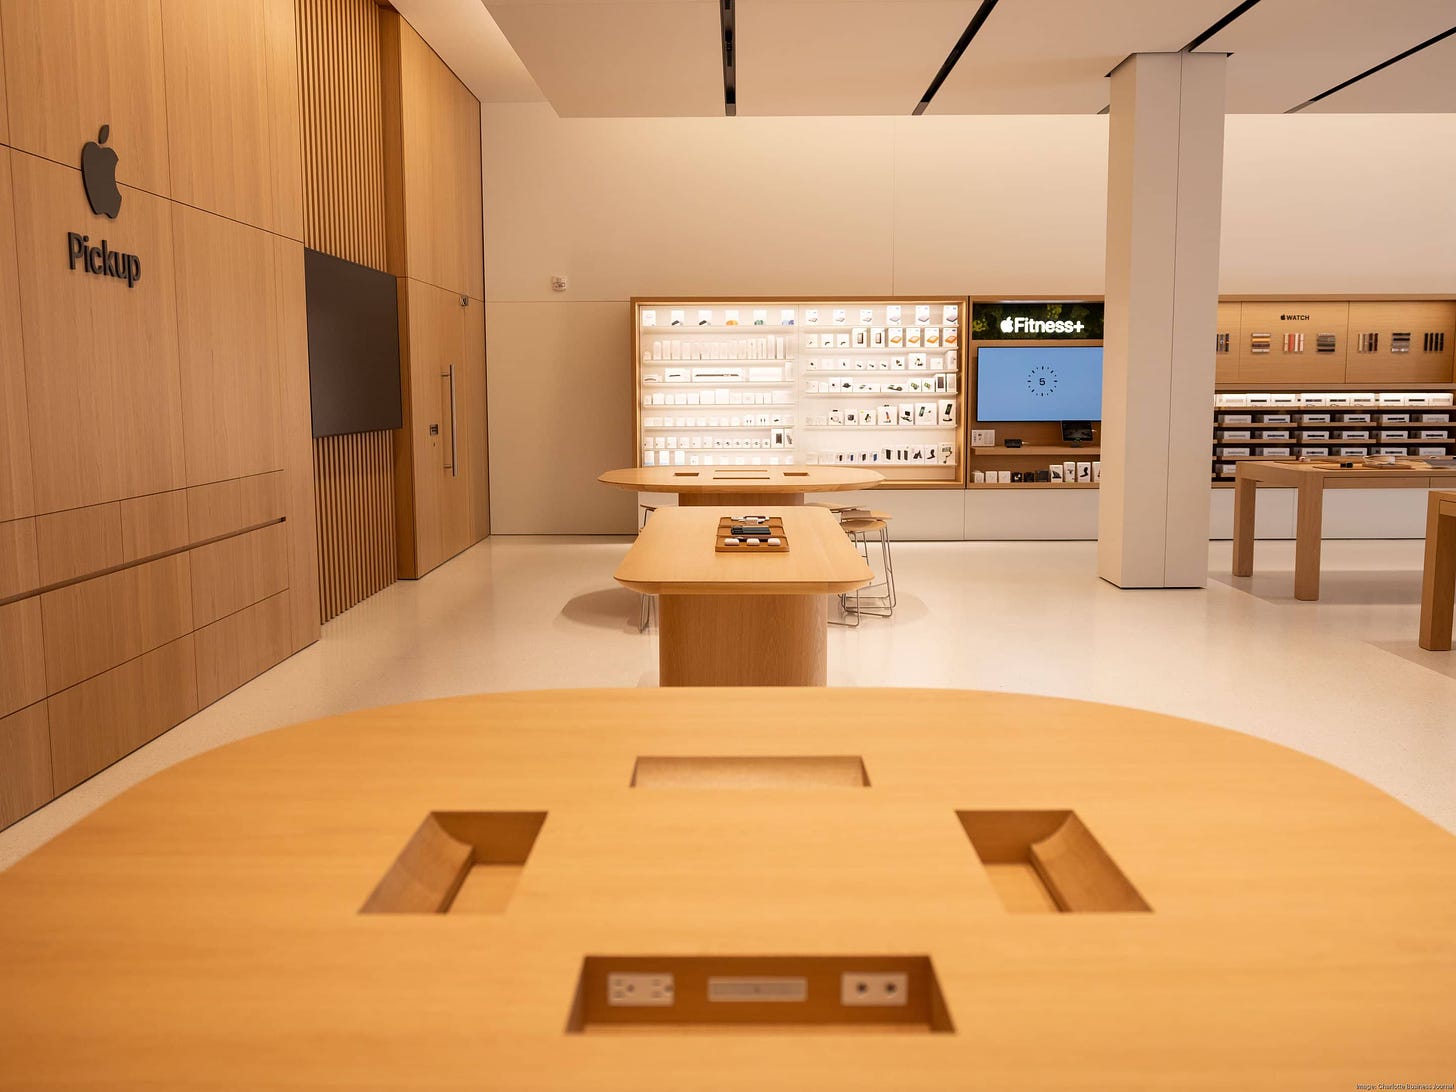 The interior of Apple Birkdale Village, from the perspective of the Today at Apple table.